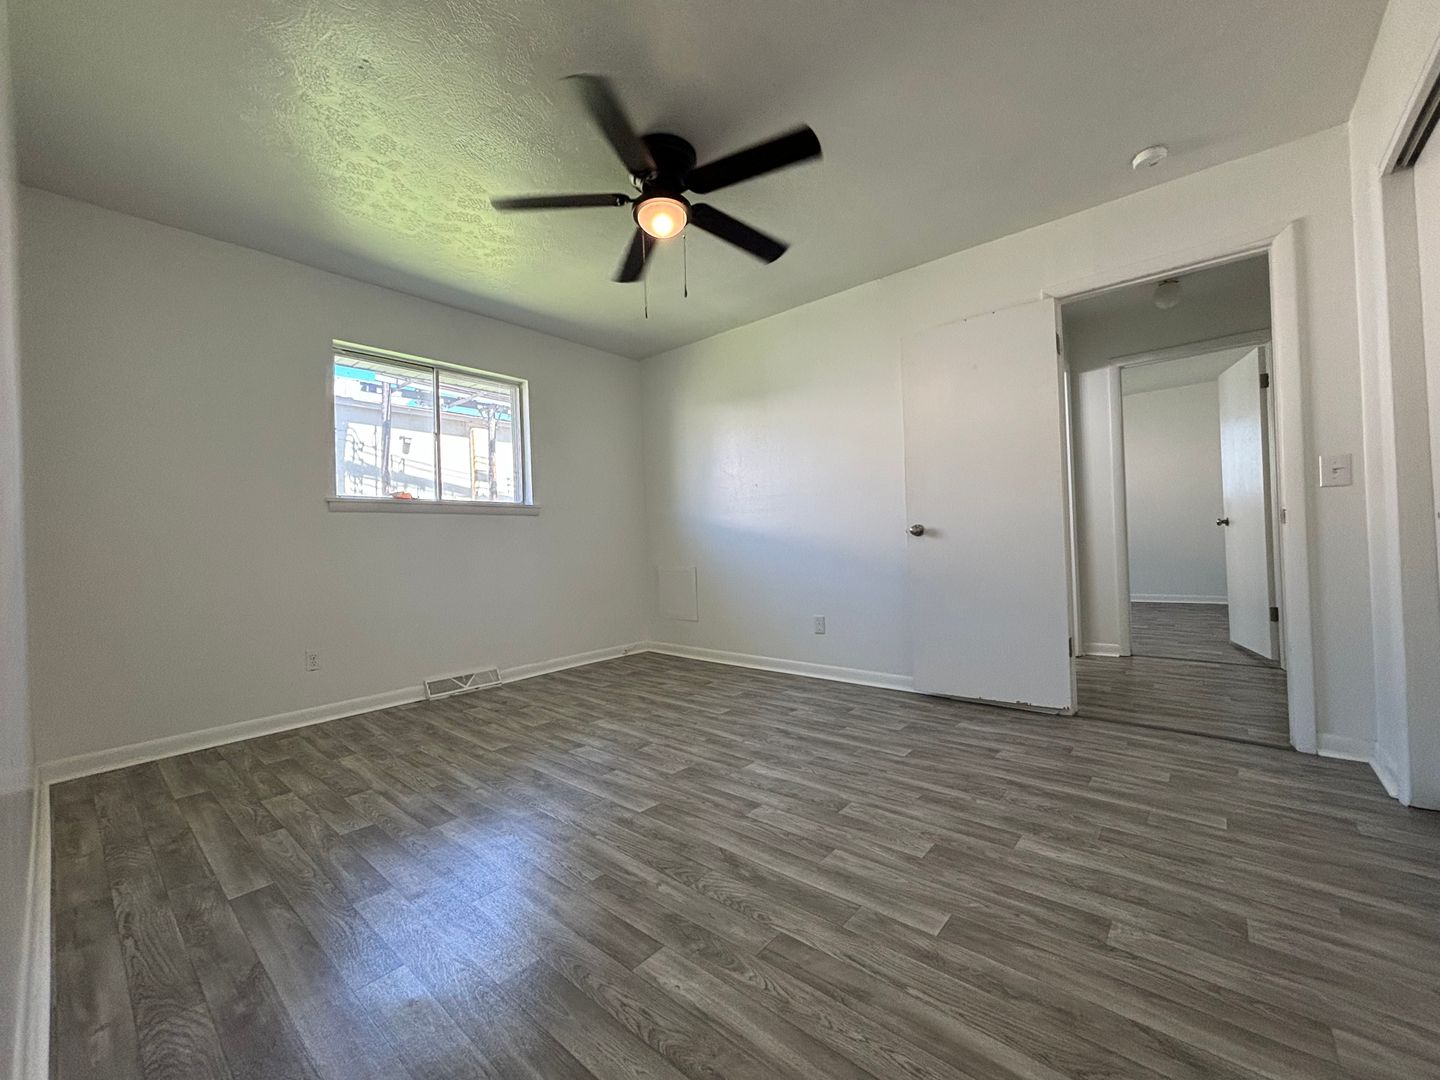 Remodeled 2 bedroom 1 bath duplex available now!